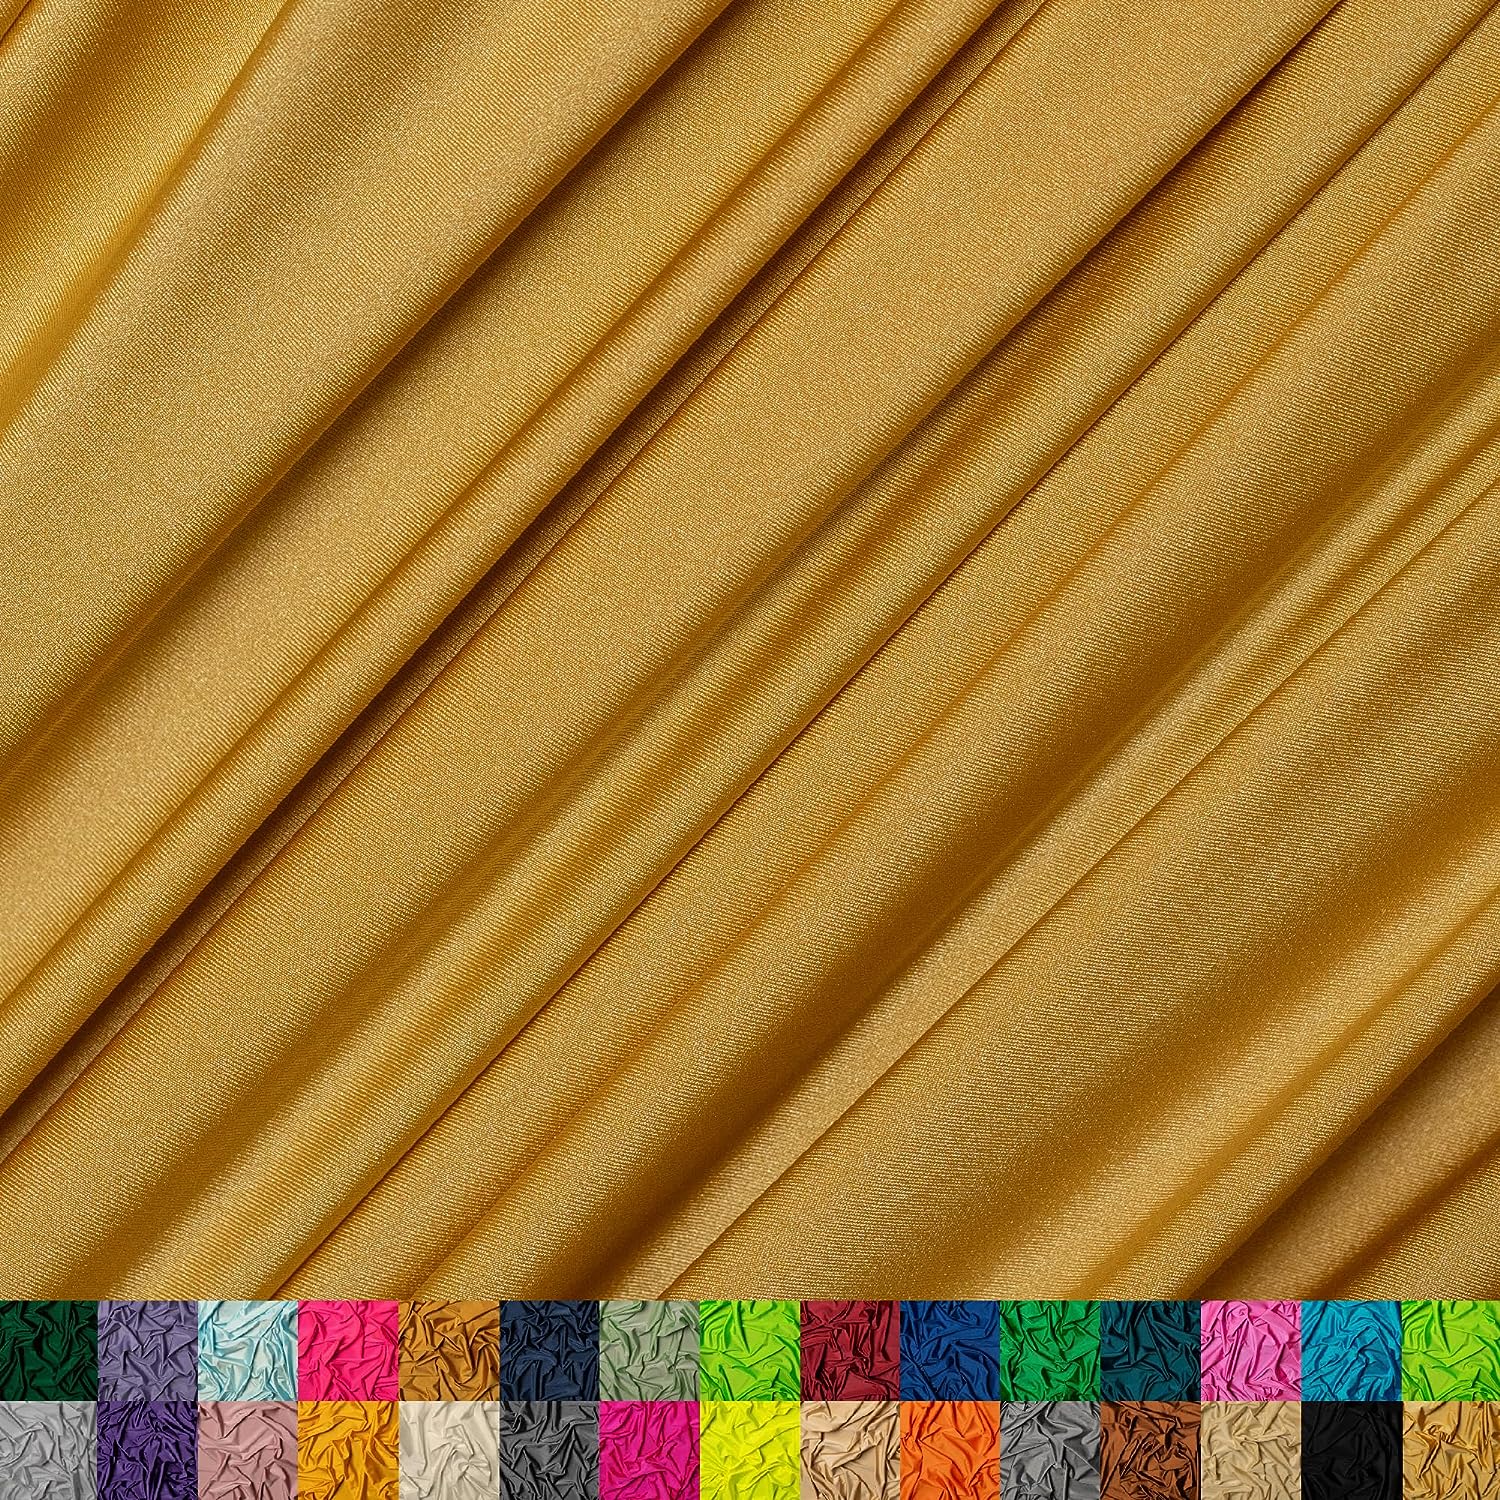 Gold Luxury Nylon Spandex Fabric By The YardICE FABRICSICE FABRICSBy The Yard (60" Width)Gold Luxury Nylon Spandex Fabric By The Yard ICE FABRICS